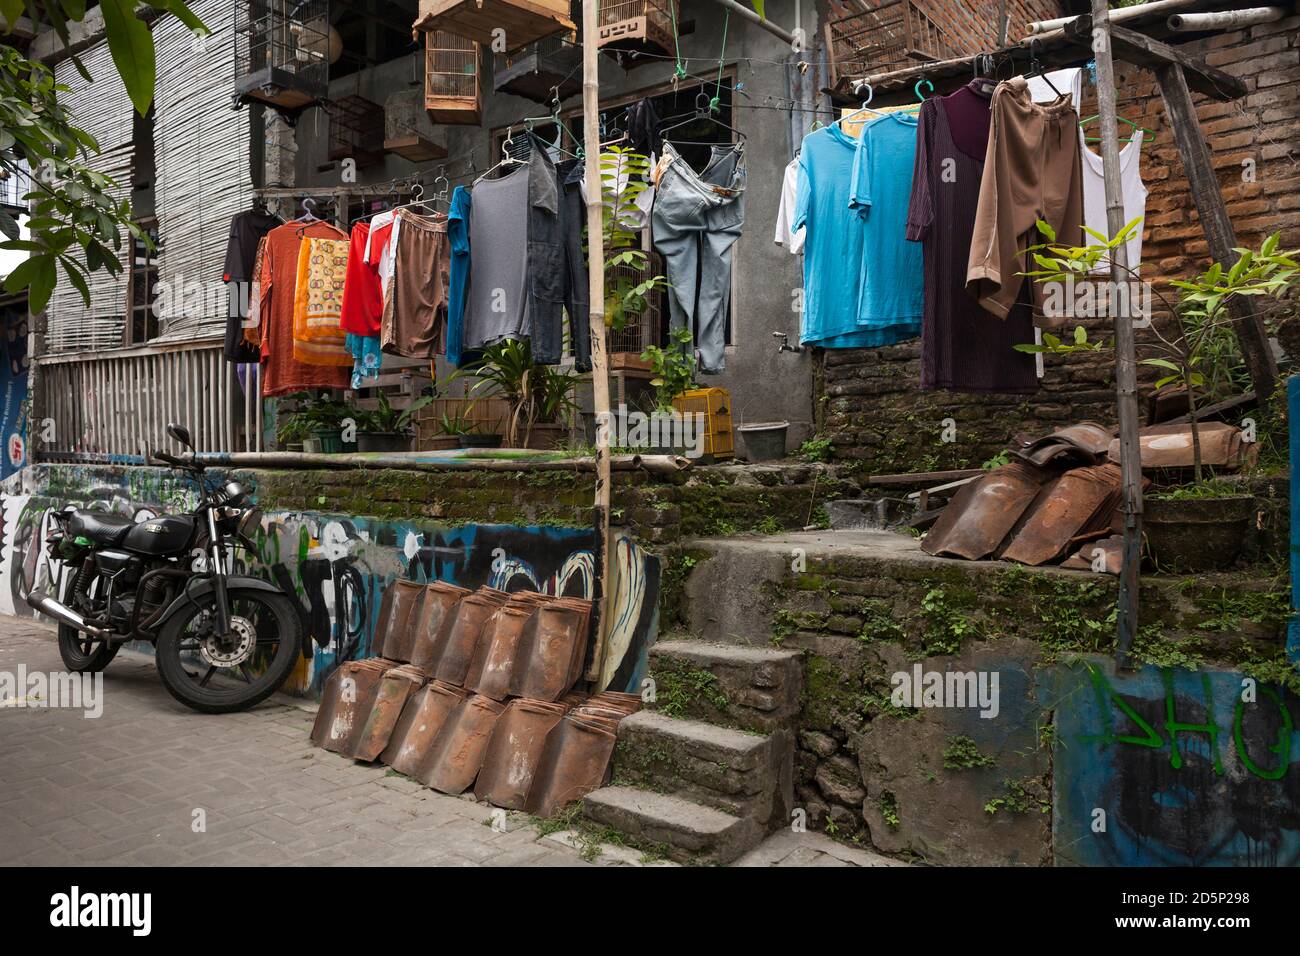 Horizontal shot of some piled tiles, cages and hanging clothes on a city center street, Yogyakarta, Java, Indonesia Stock Photo